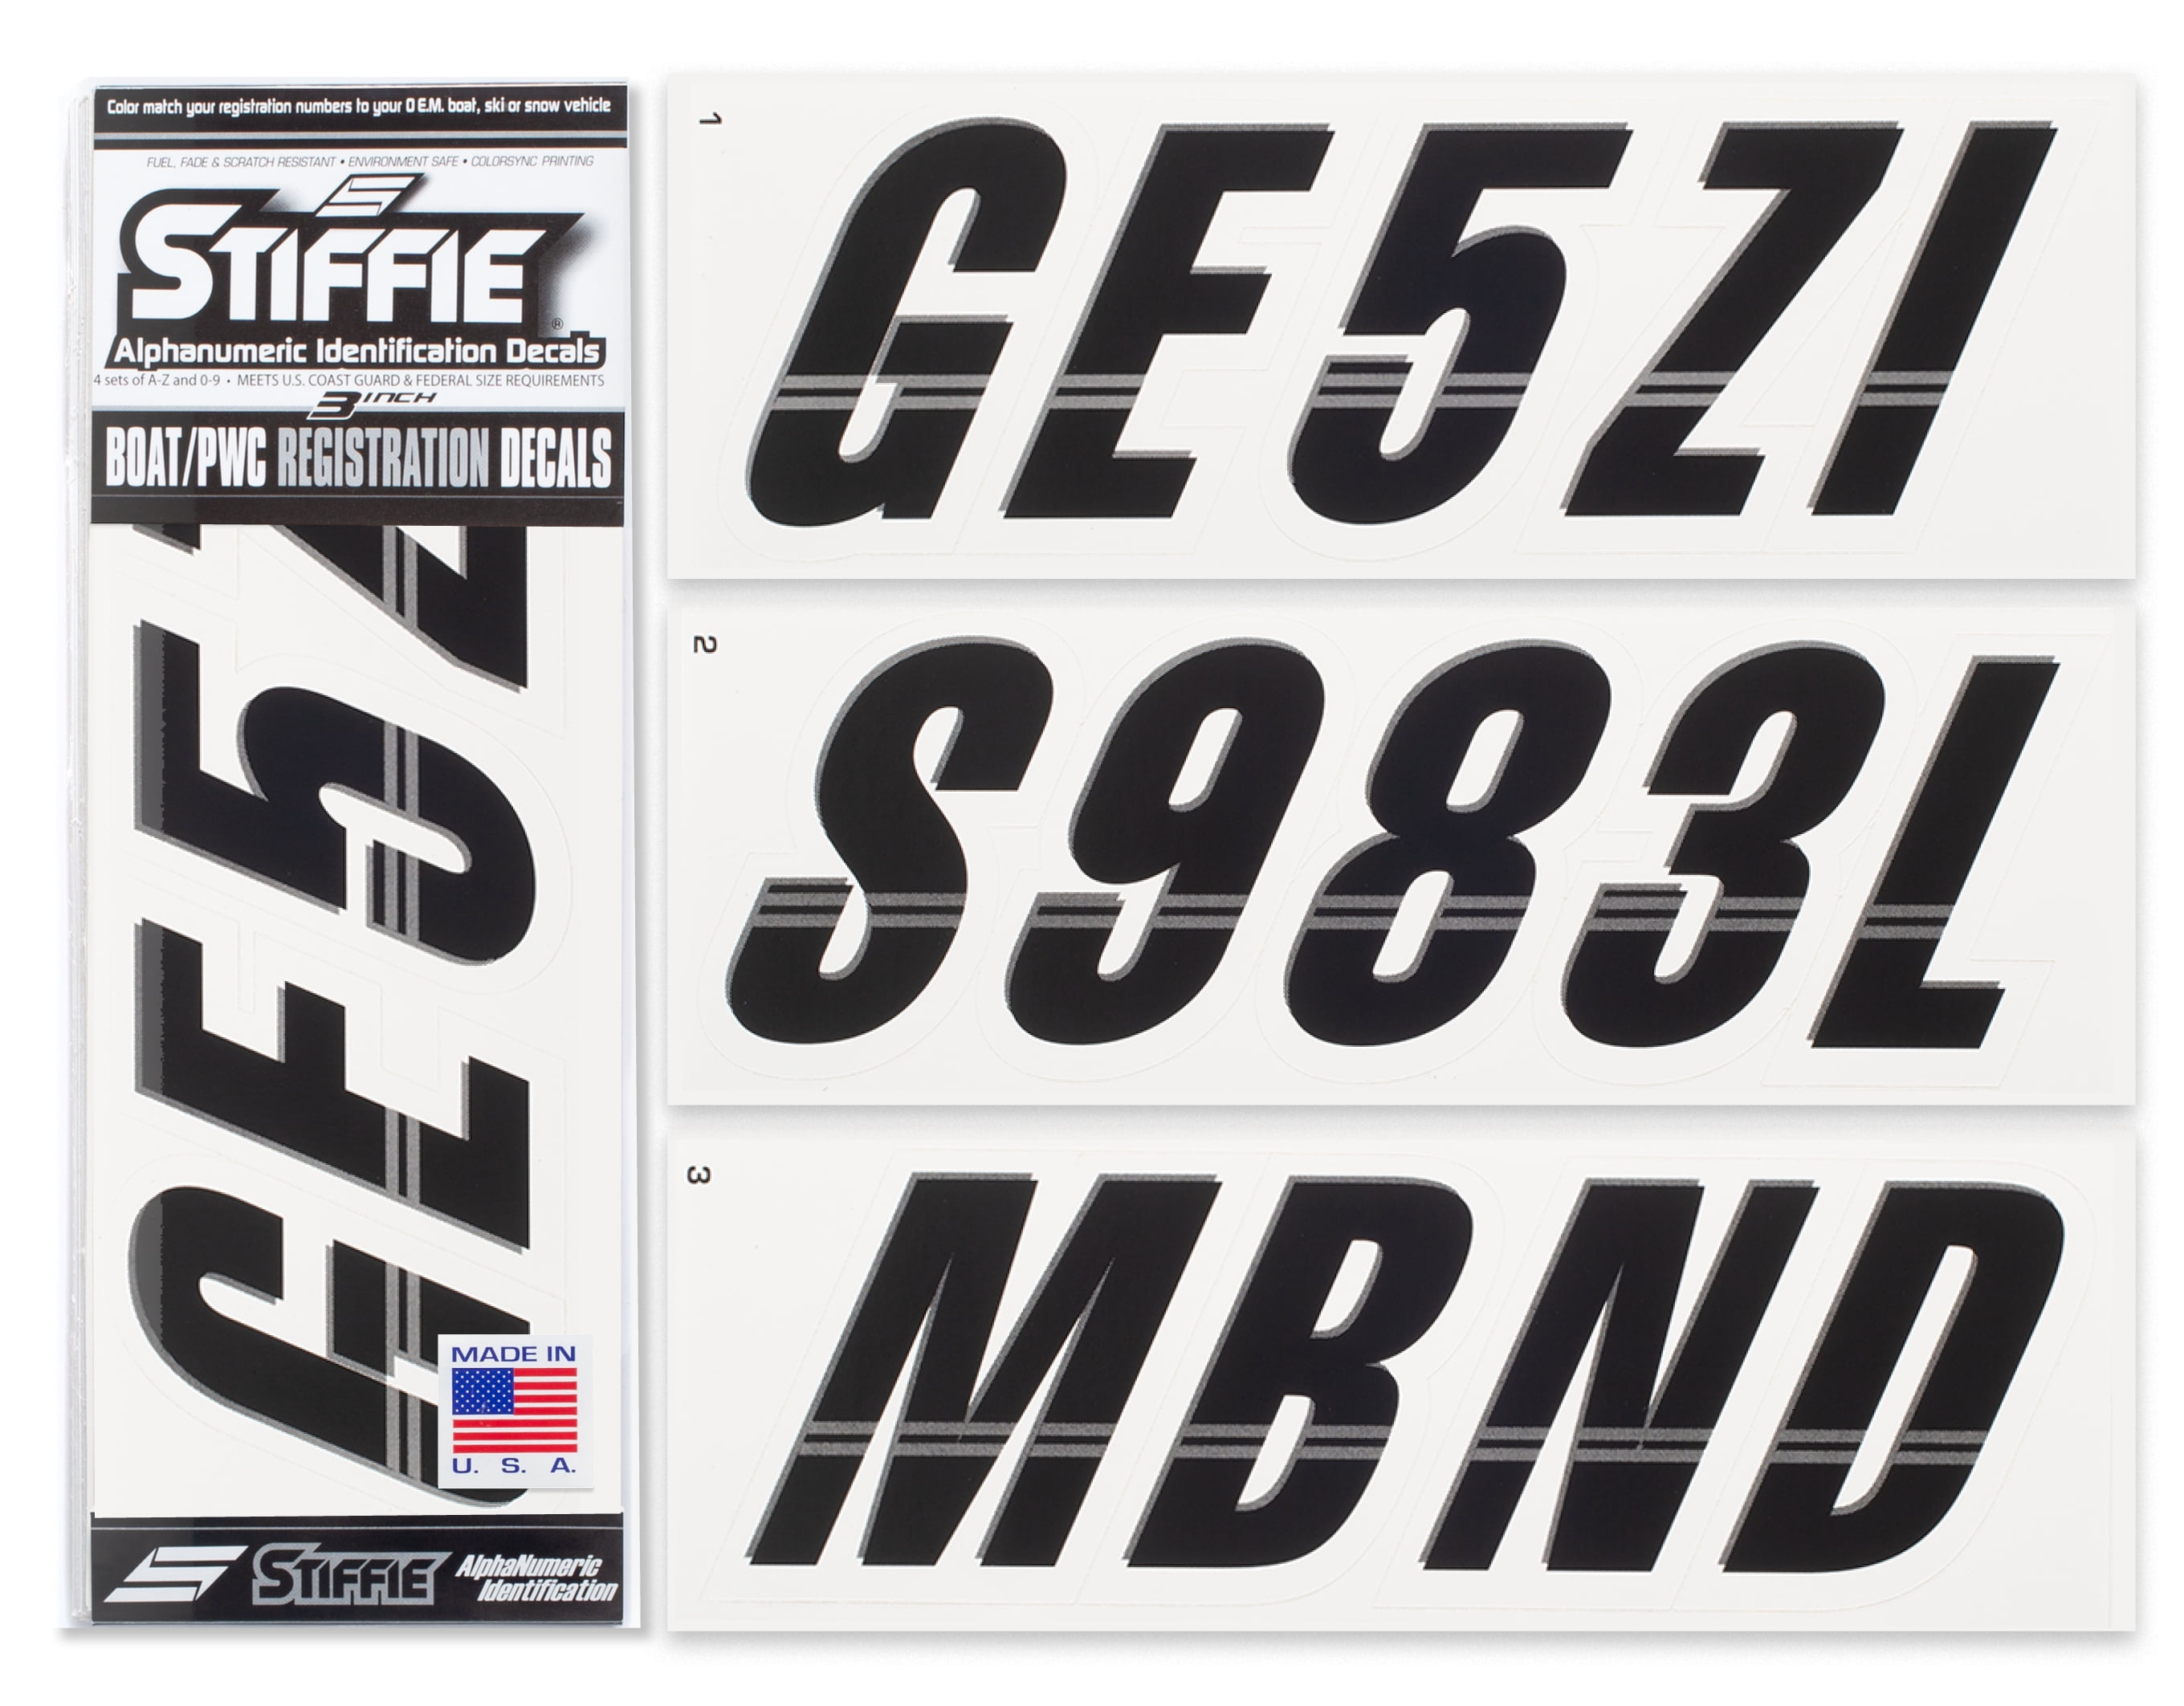 Details about   2x200mm Fishing Boat REGISTRATION rego numbers lettering marine decals stickers